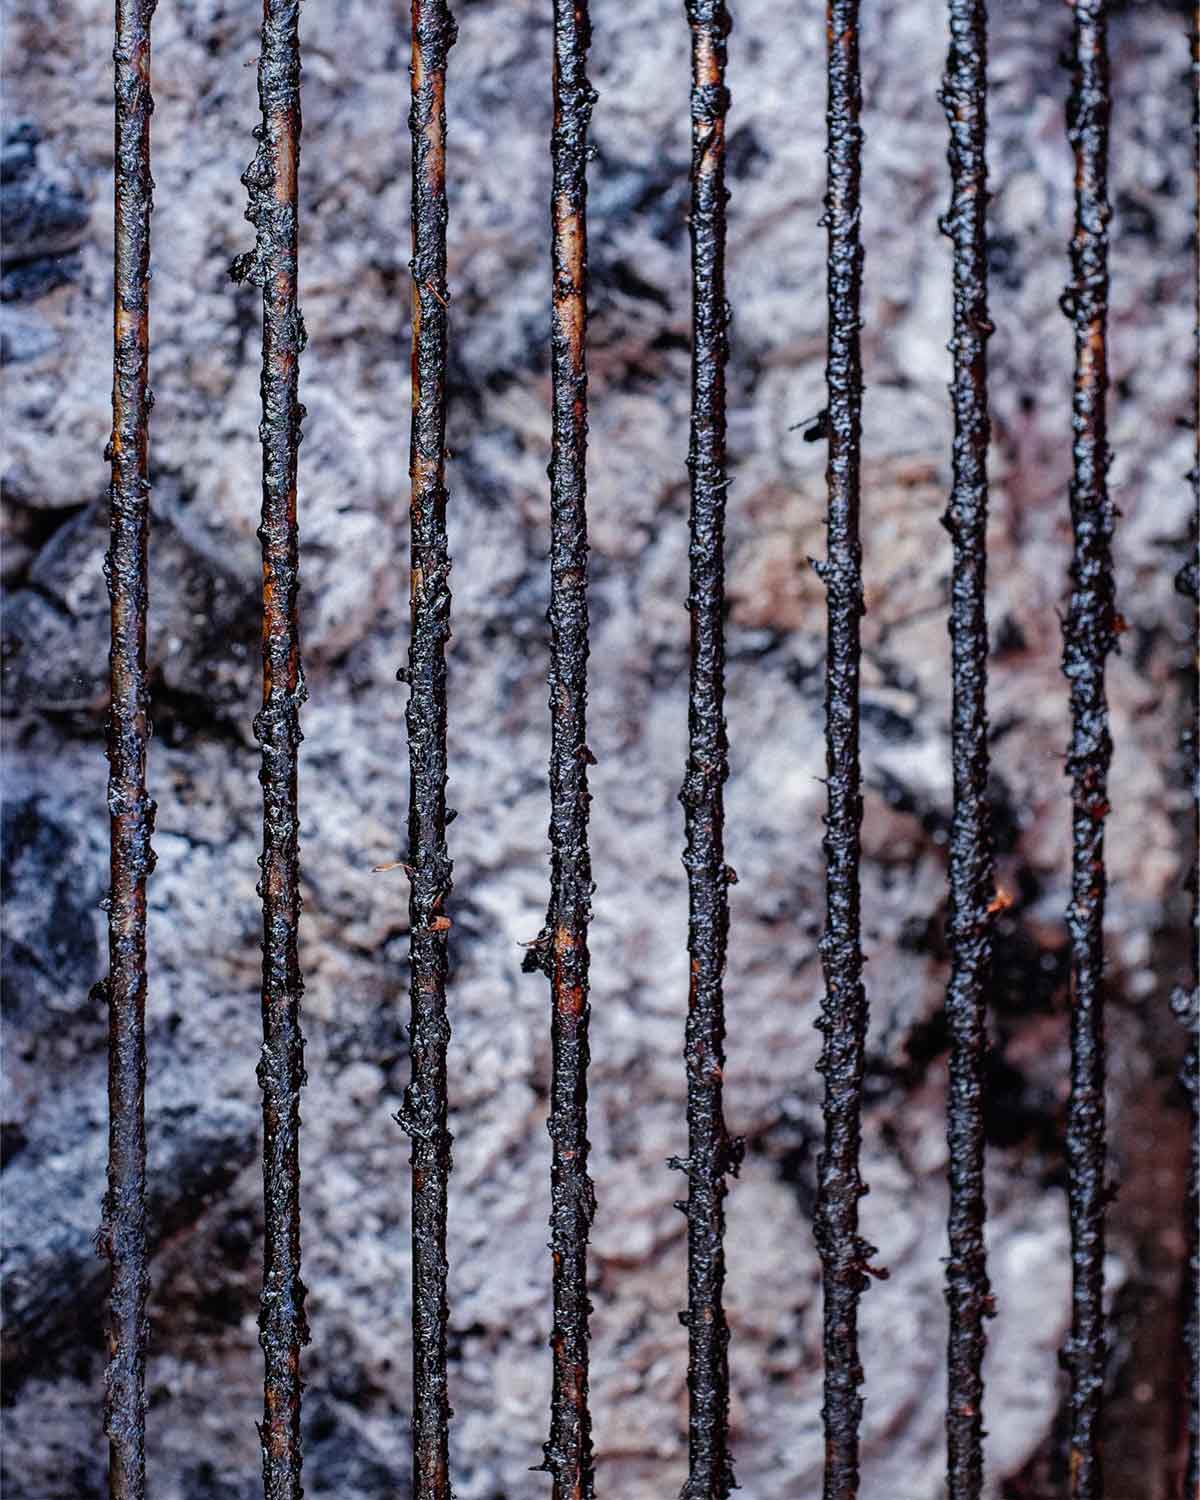 An image of a very dirty grill grate to illustrate how to clean your grill.